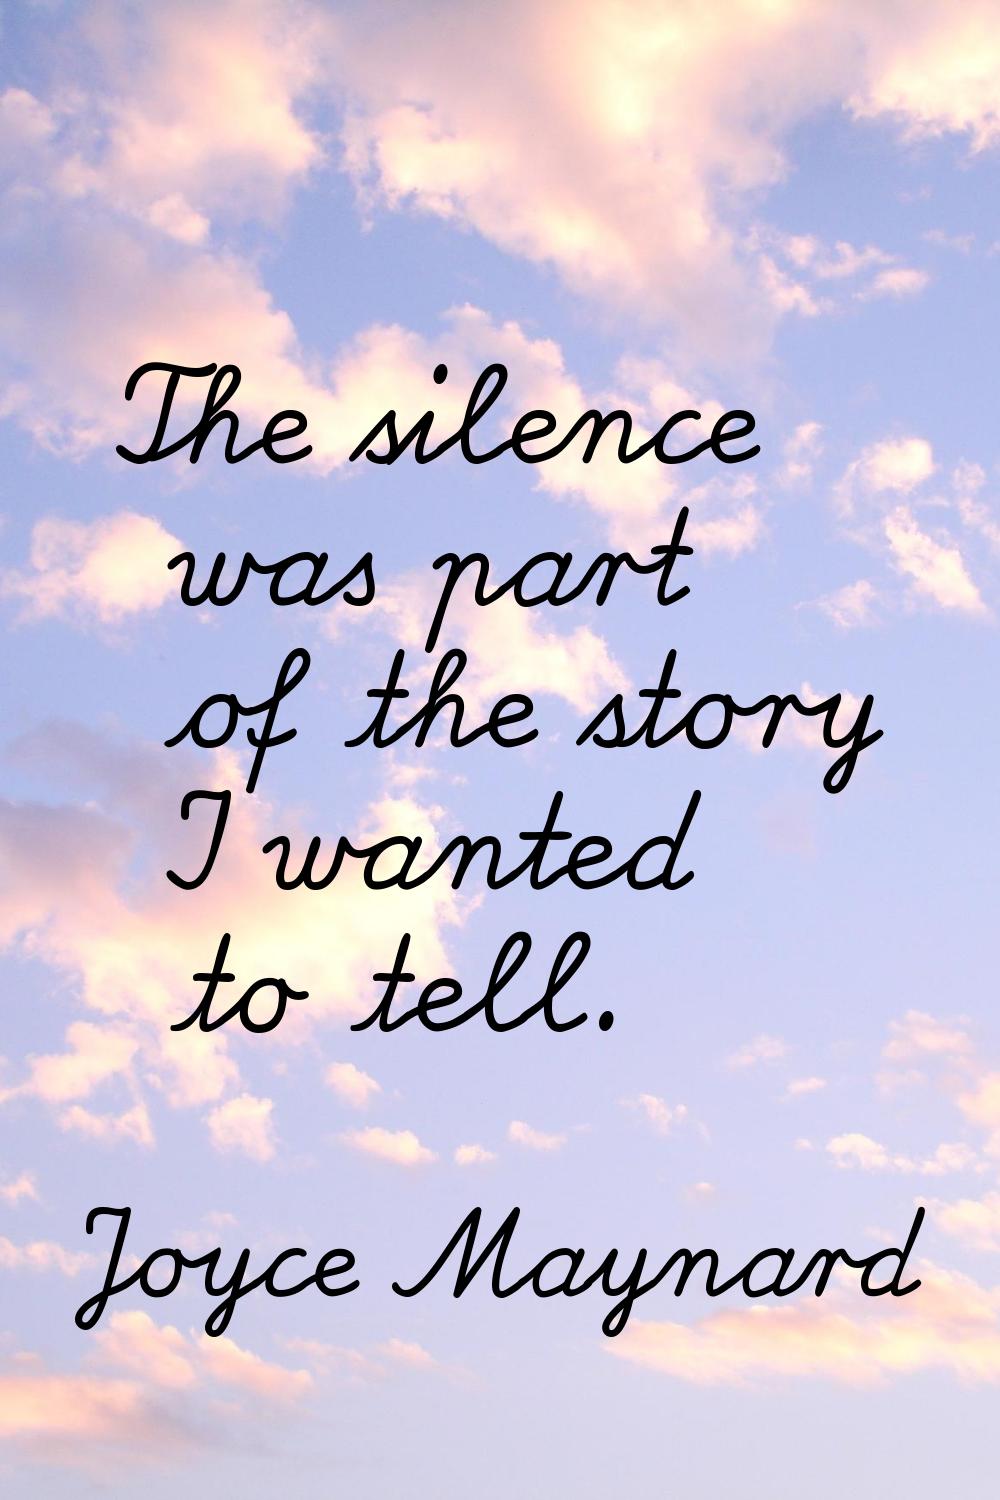 The silence was part of the story I wanted to tell.